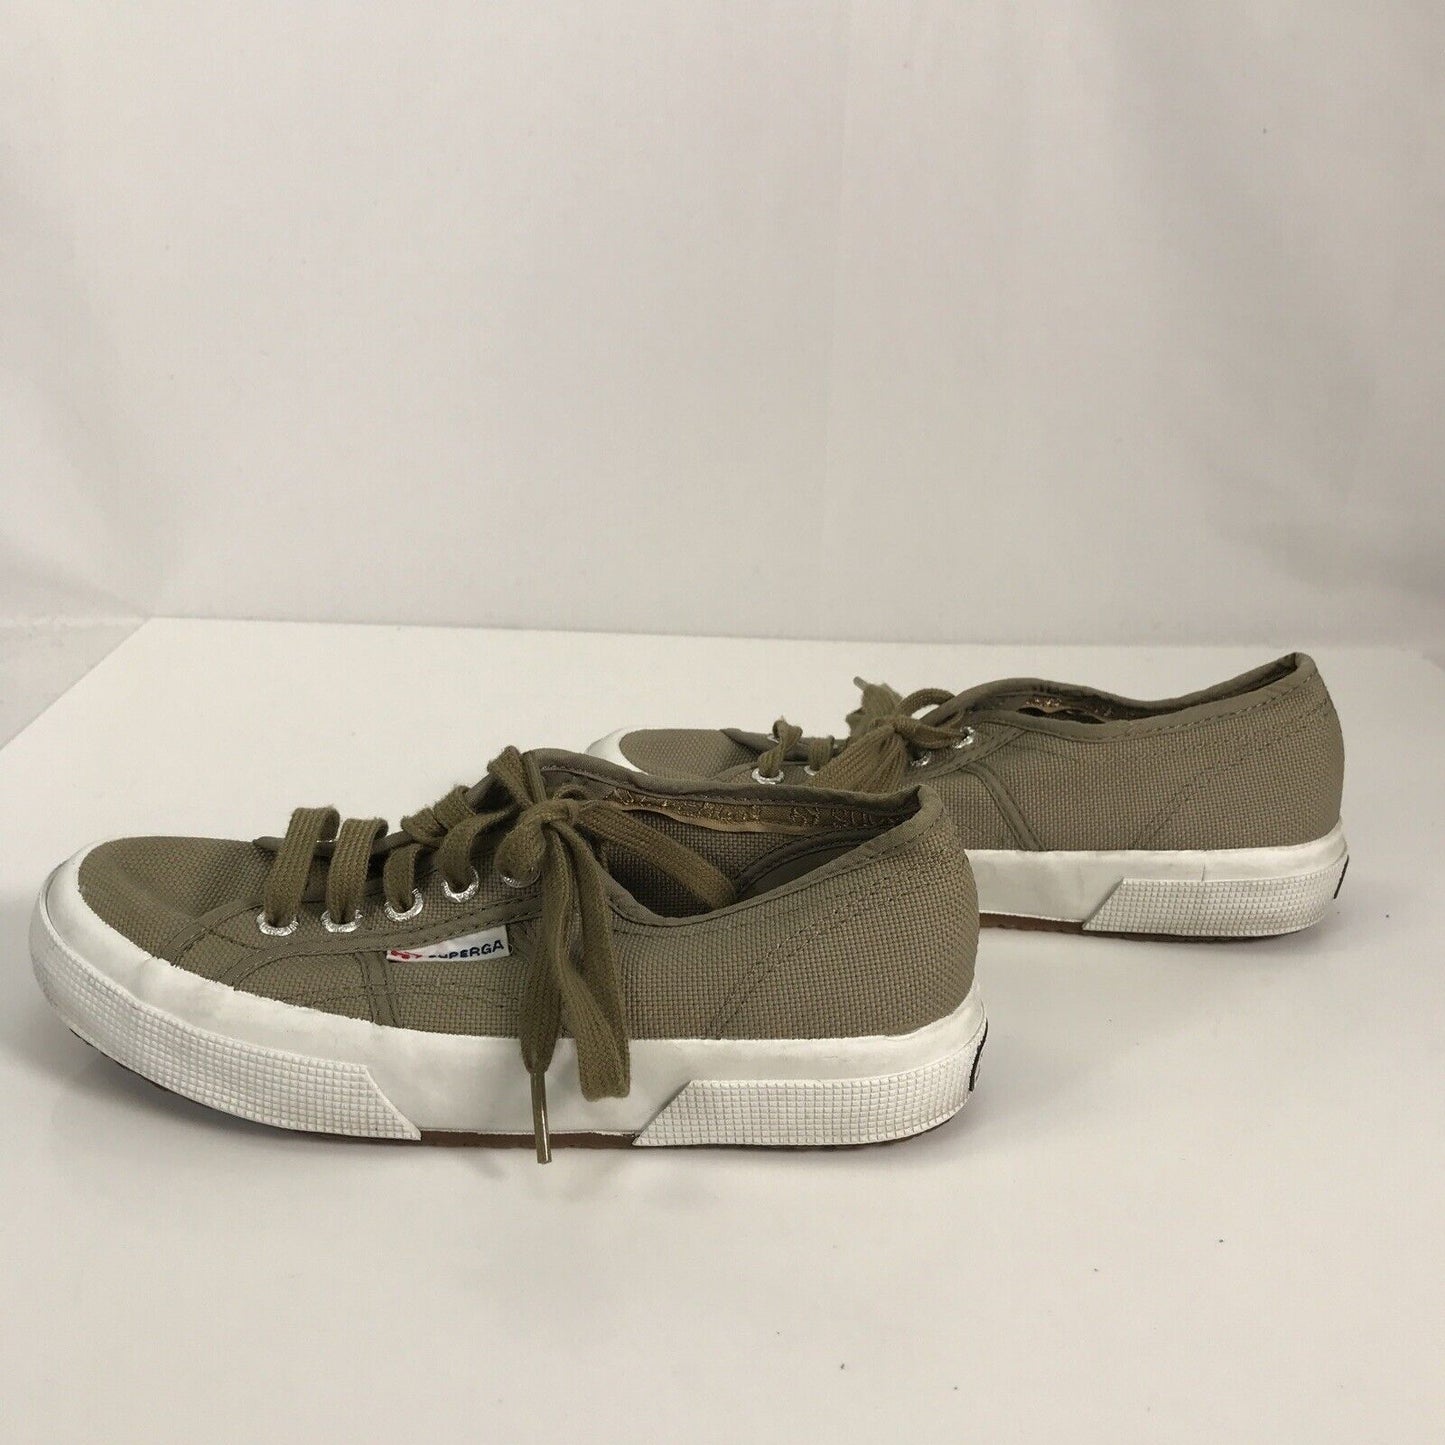 Superga Women's Green Fabric Lace Up Low Top Sneakers Sz 6